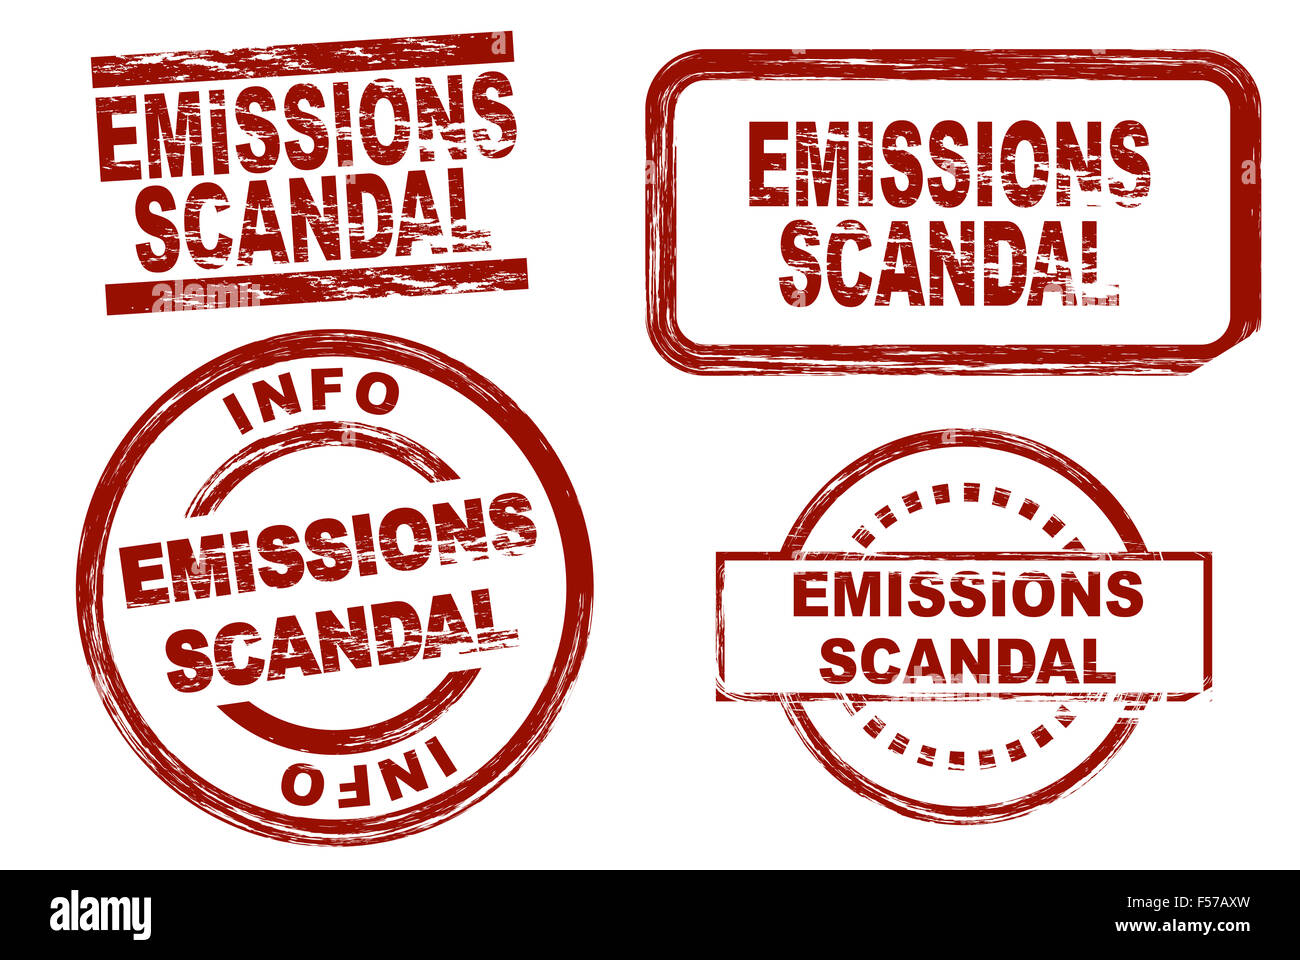 Set of stylized stamps showing the term emissions scandal. All on white background. Stock Photo